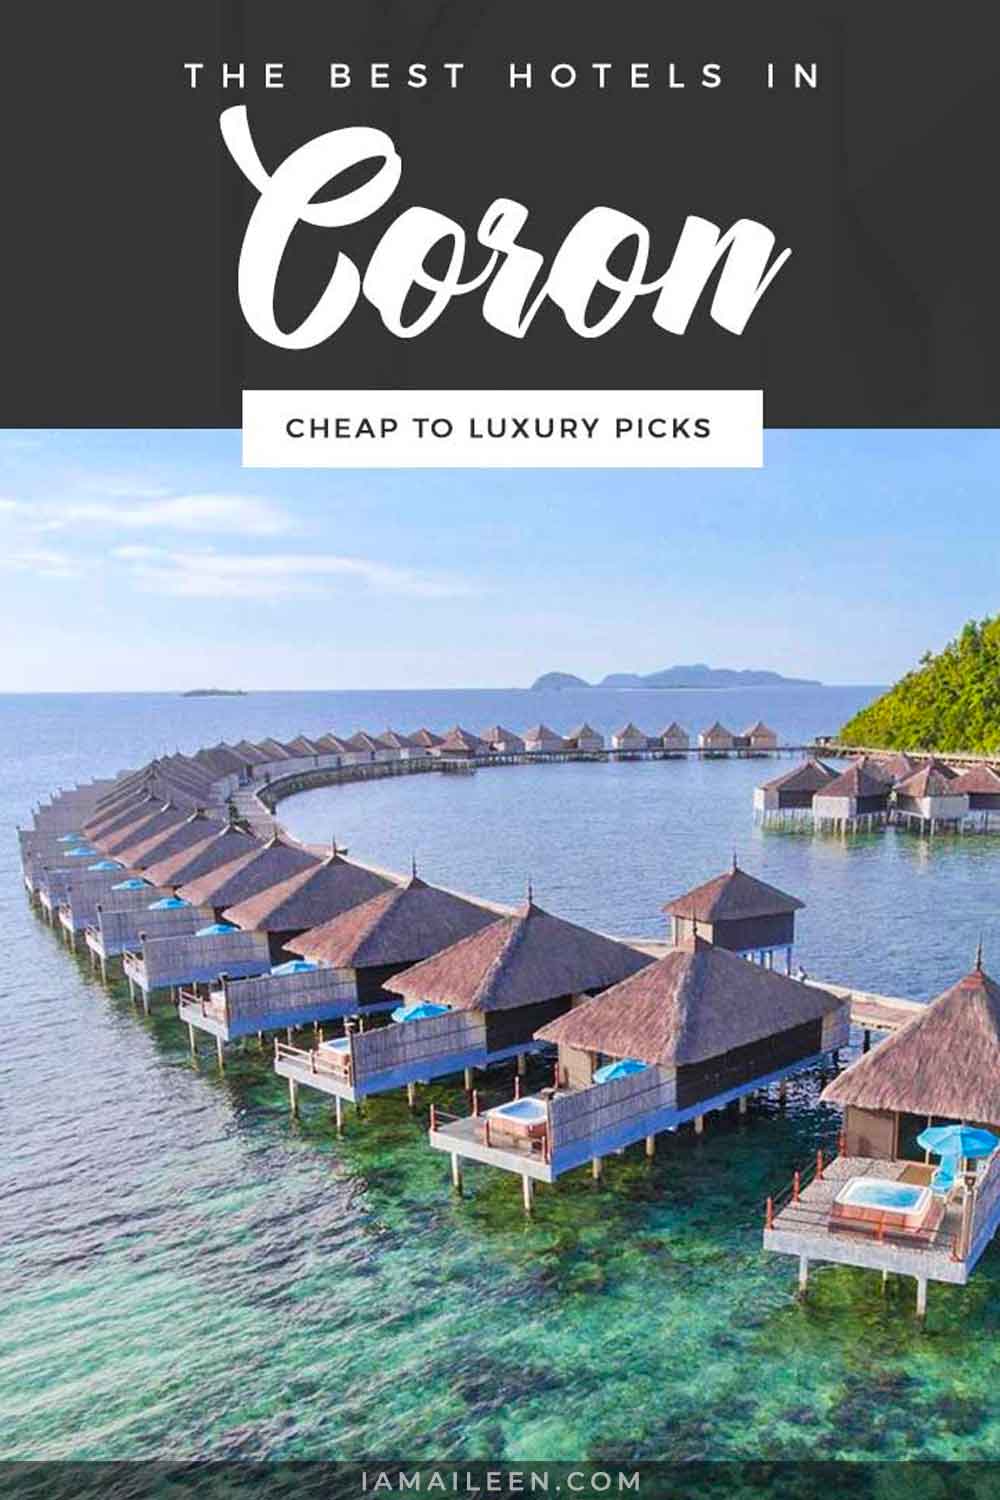 The Best Hotels in Coron, Philippines: Cheap to Luxury Picks